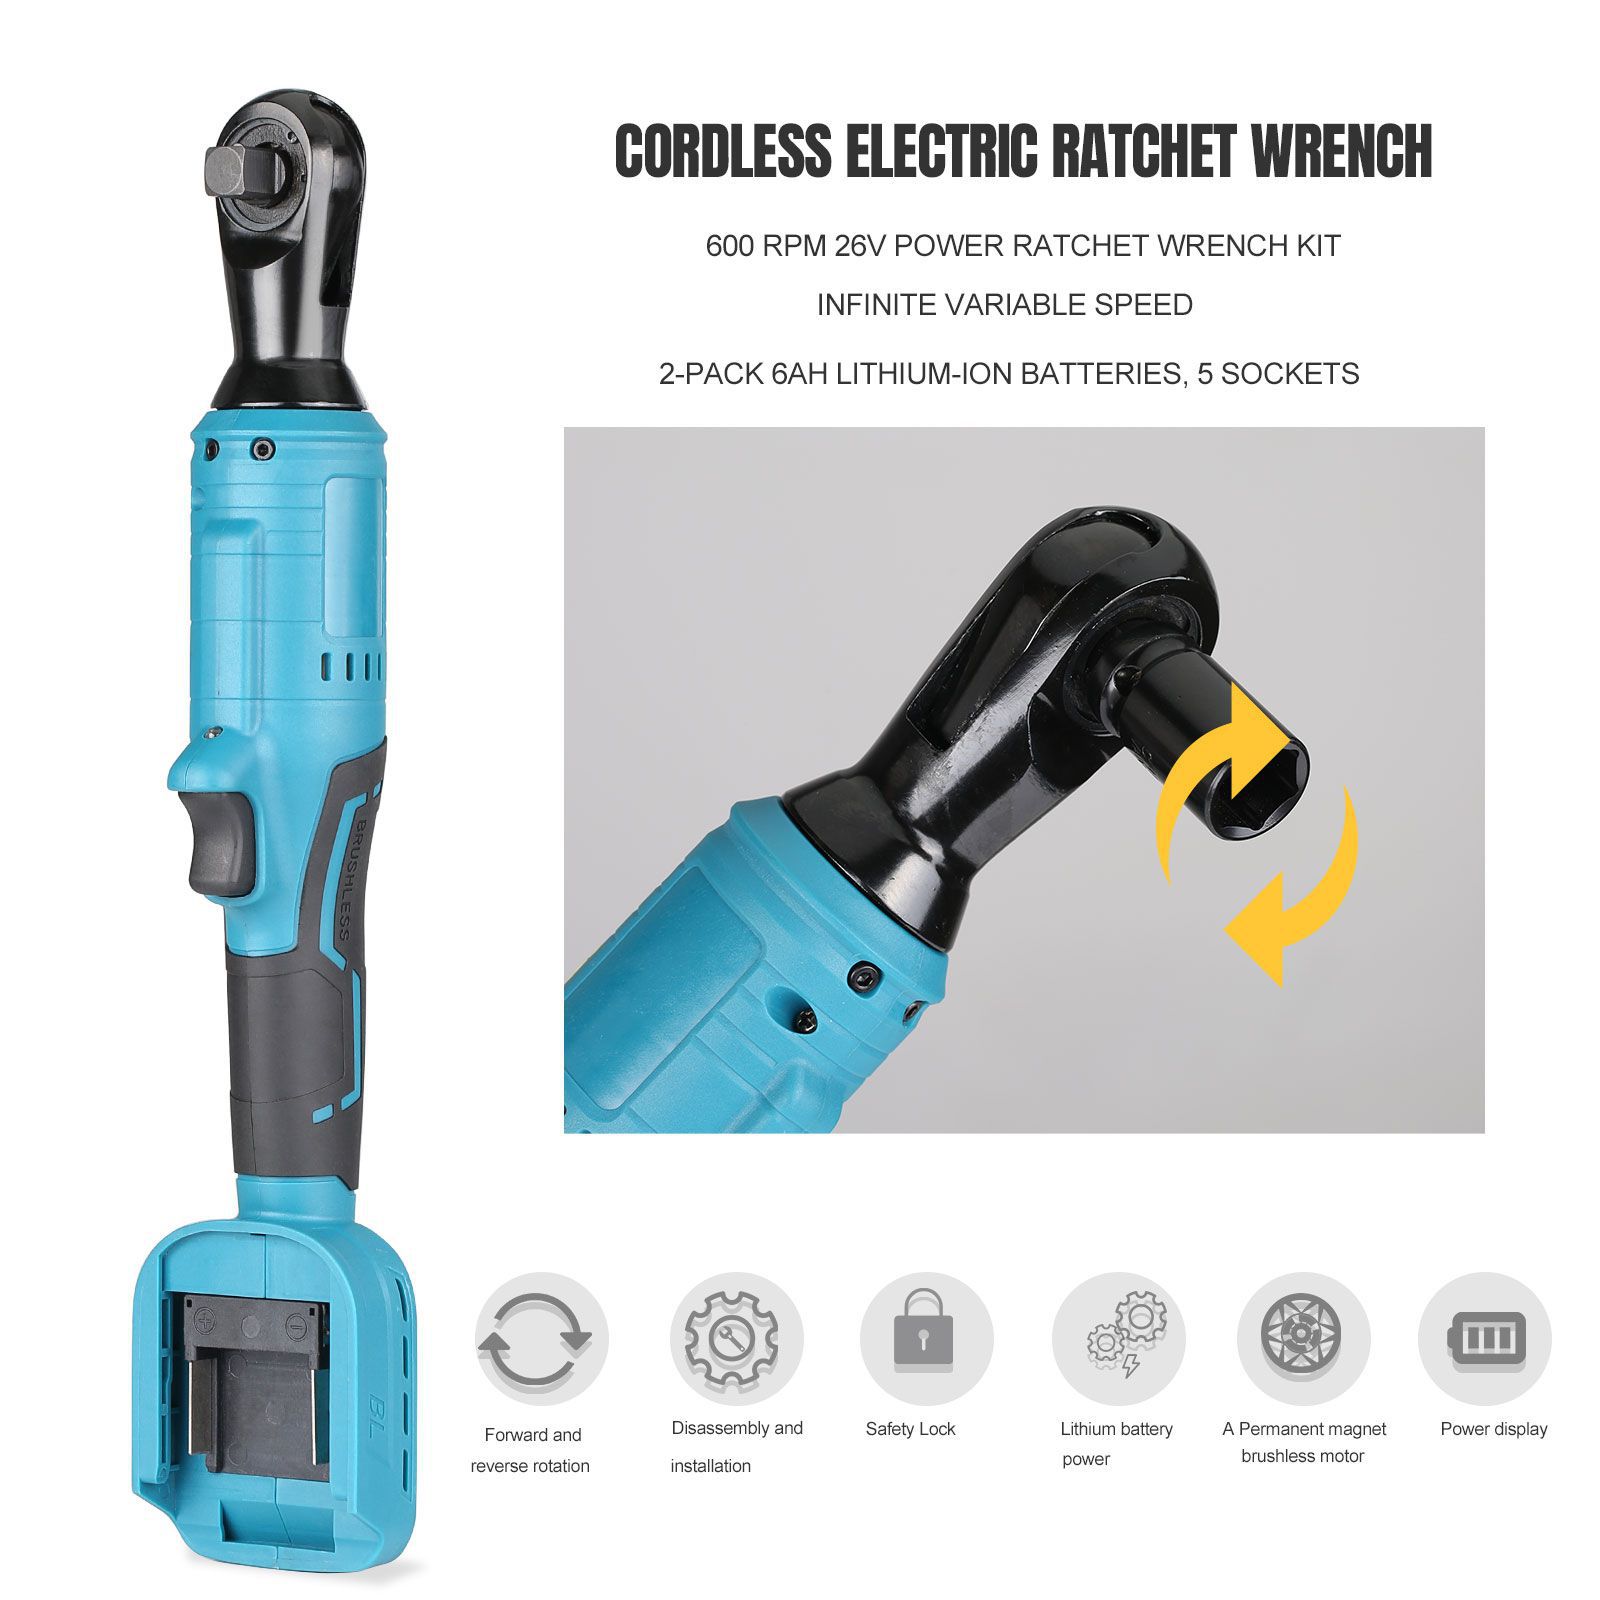 Cordless Electric Ratchet Wrench 600 RPM 26V Power Ratchet Wrench Kit Infinite Variable Speed 2-Pack 6Ah Lithium-Ion Batteries